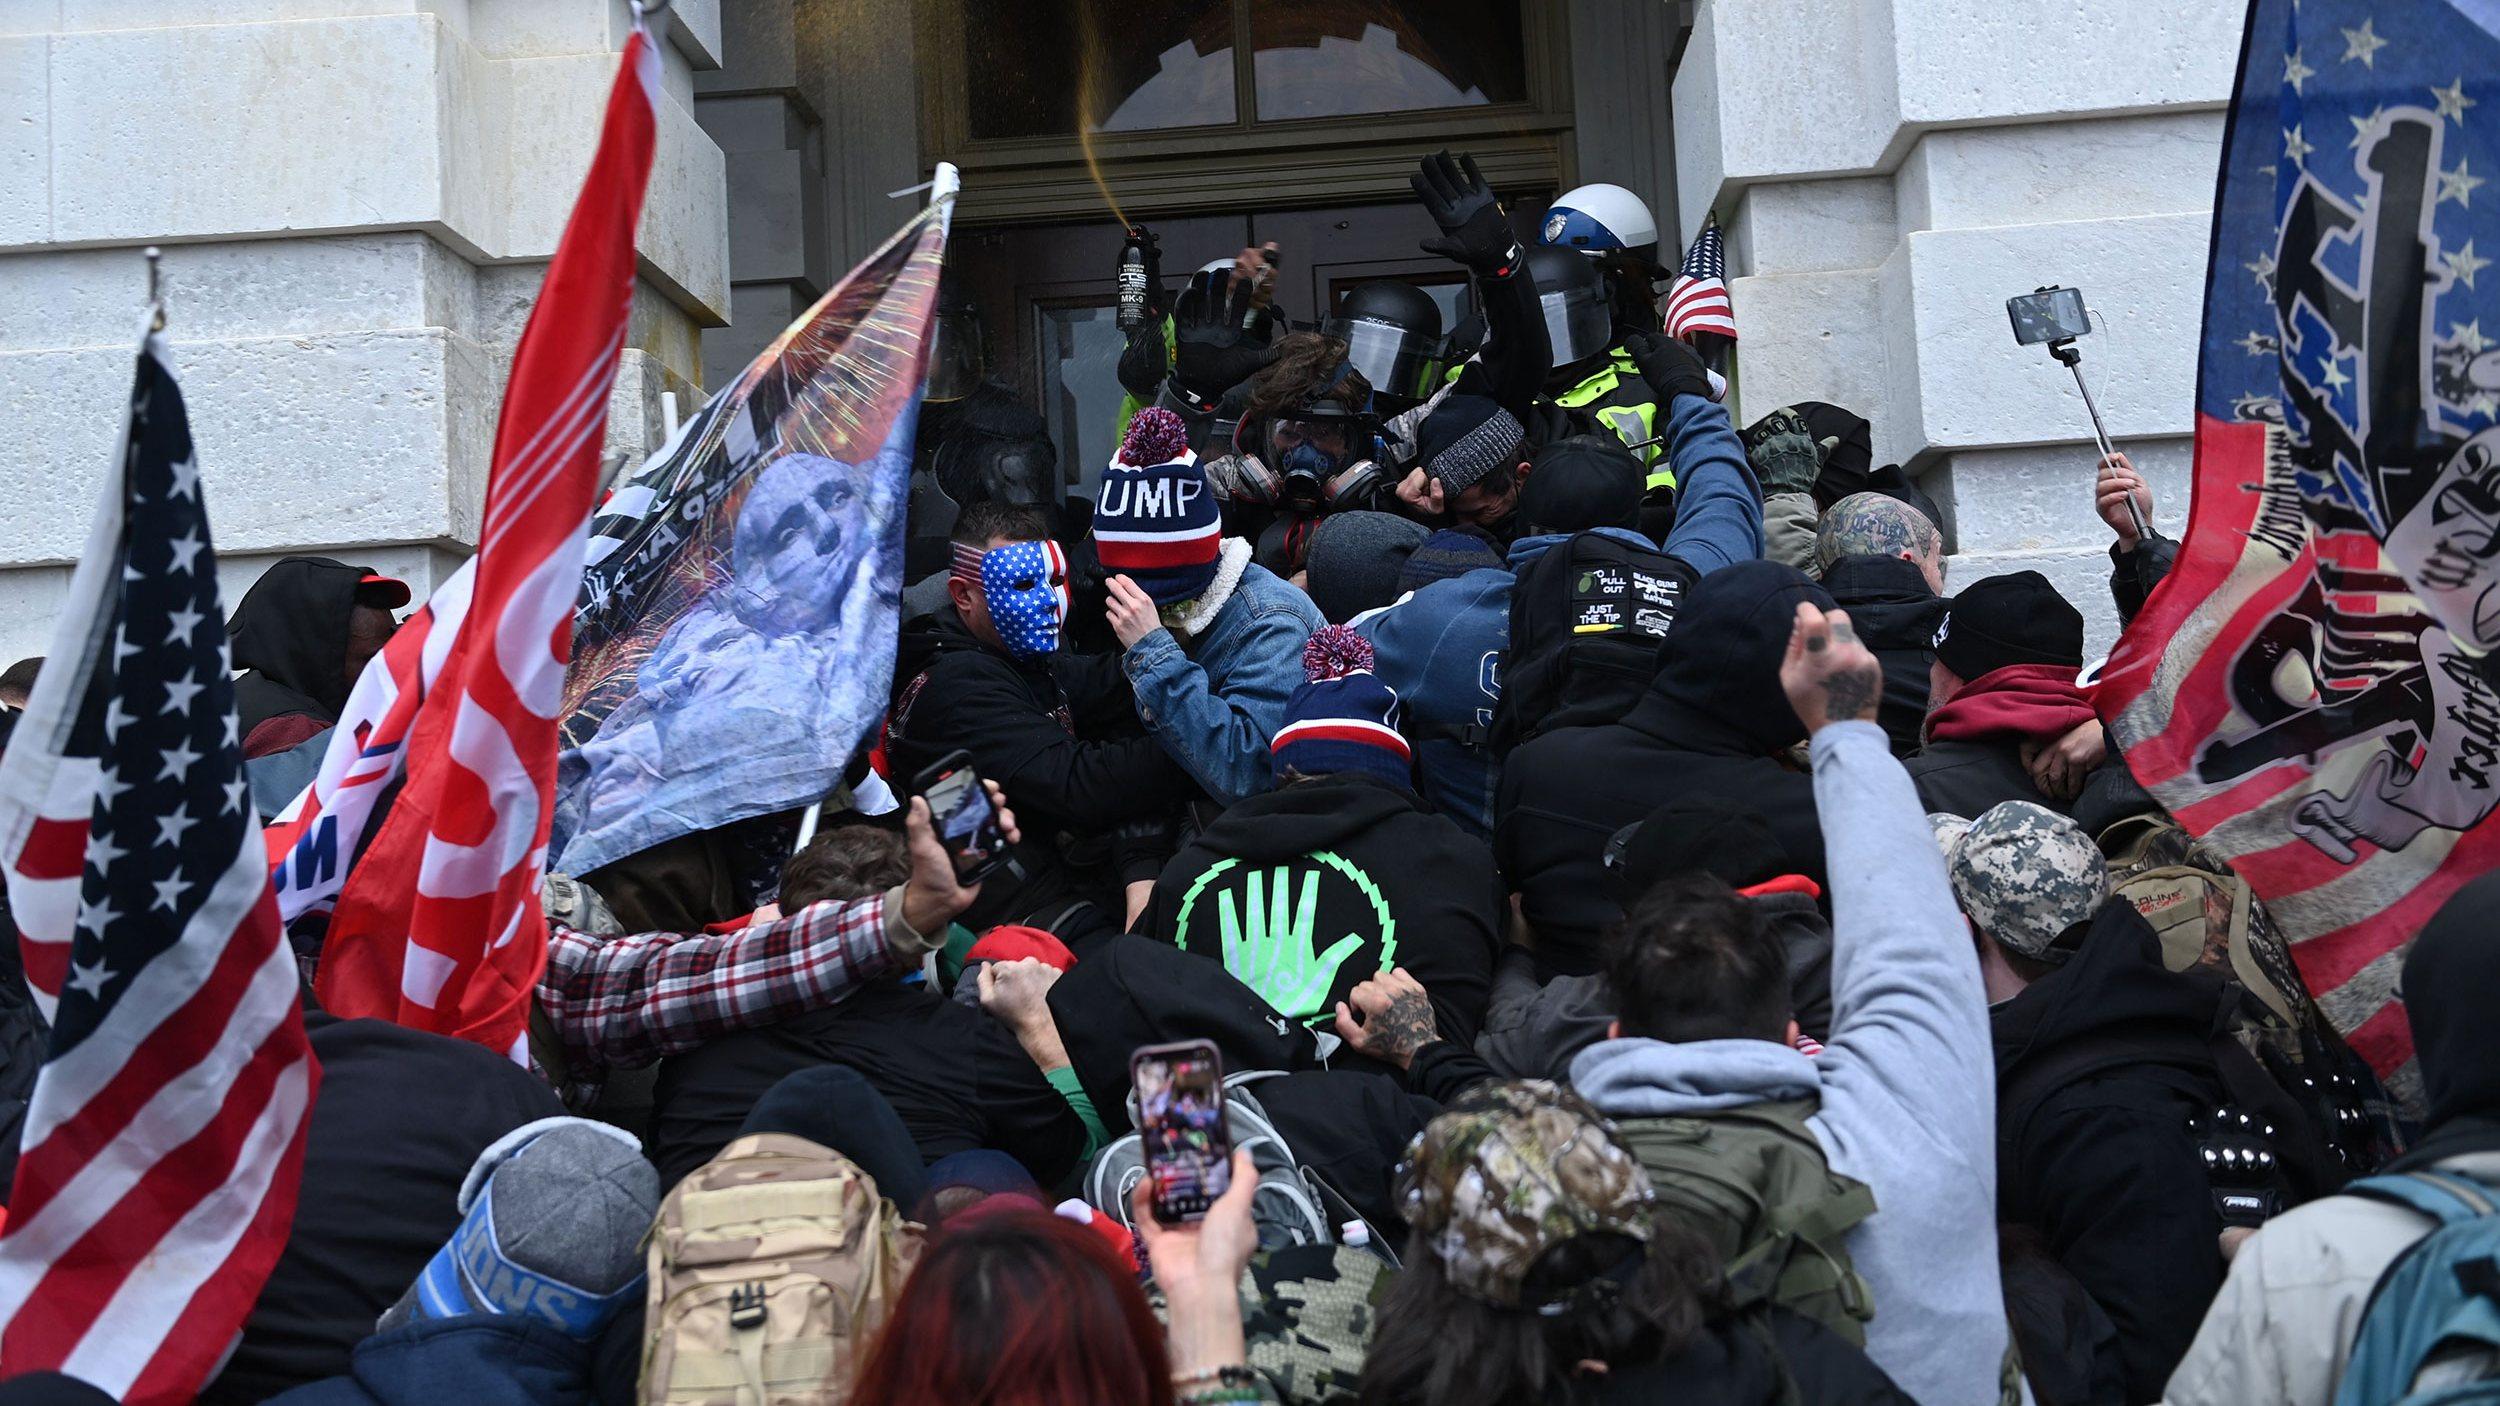 Trump supporters clash with police and security forces as they storm the Capitol in Washington, D.C. on Jan. 6, 2021.(Brendan Smialowski / AFP / Getty Images)